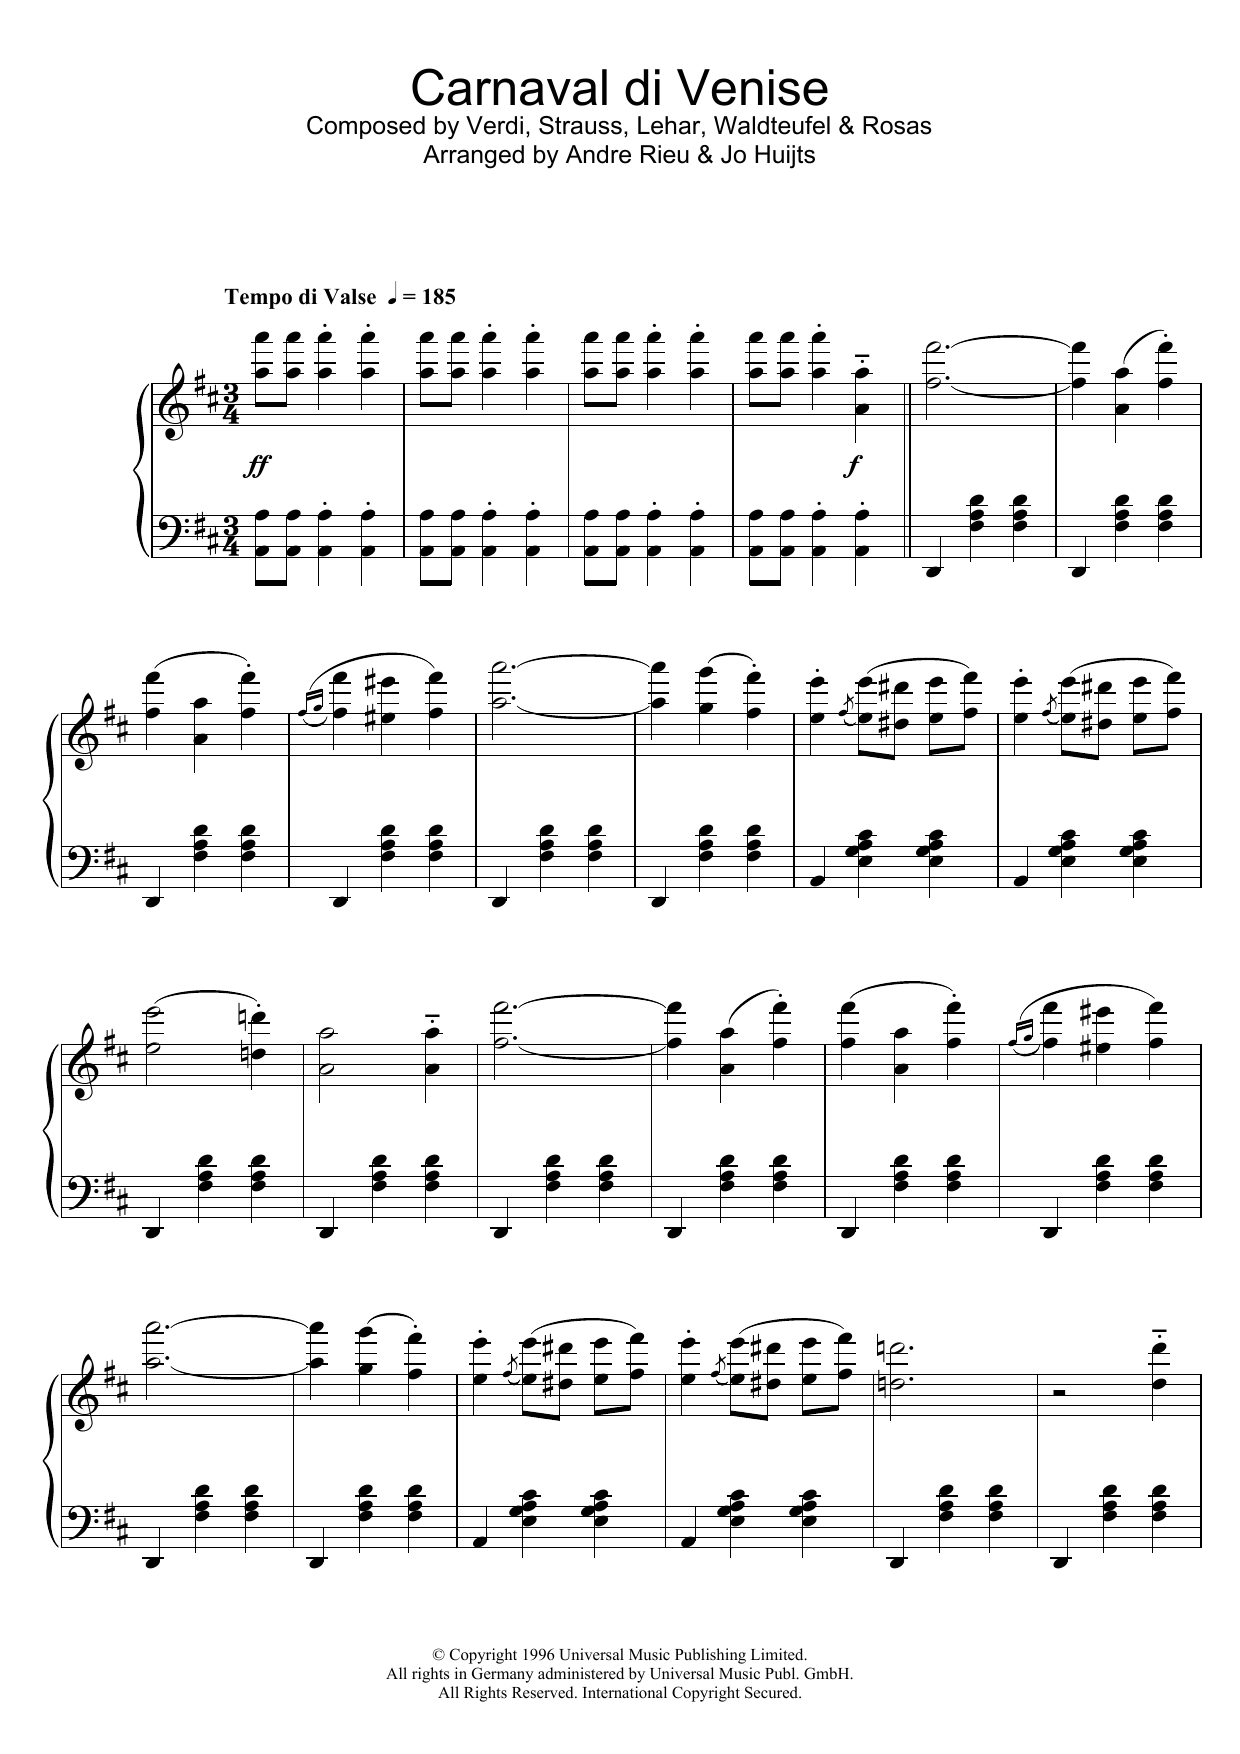 Andre Rieu Carnaval de Venise sheet music notes and chords. Download Printable PDF.